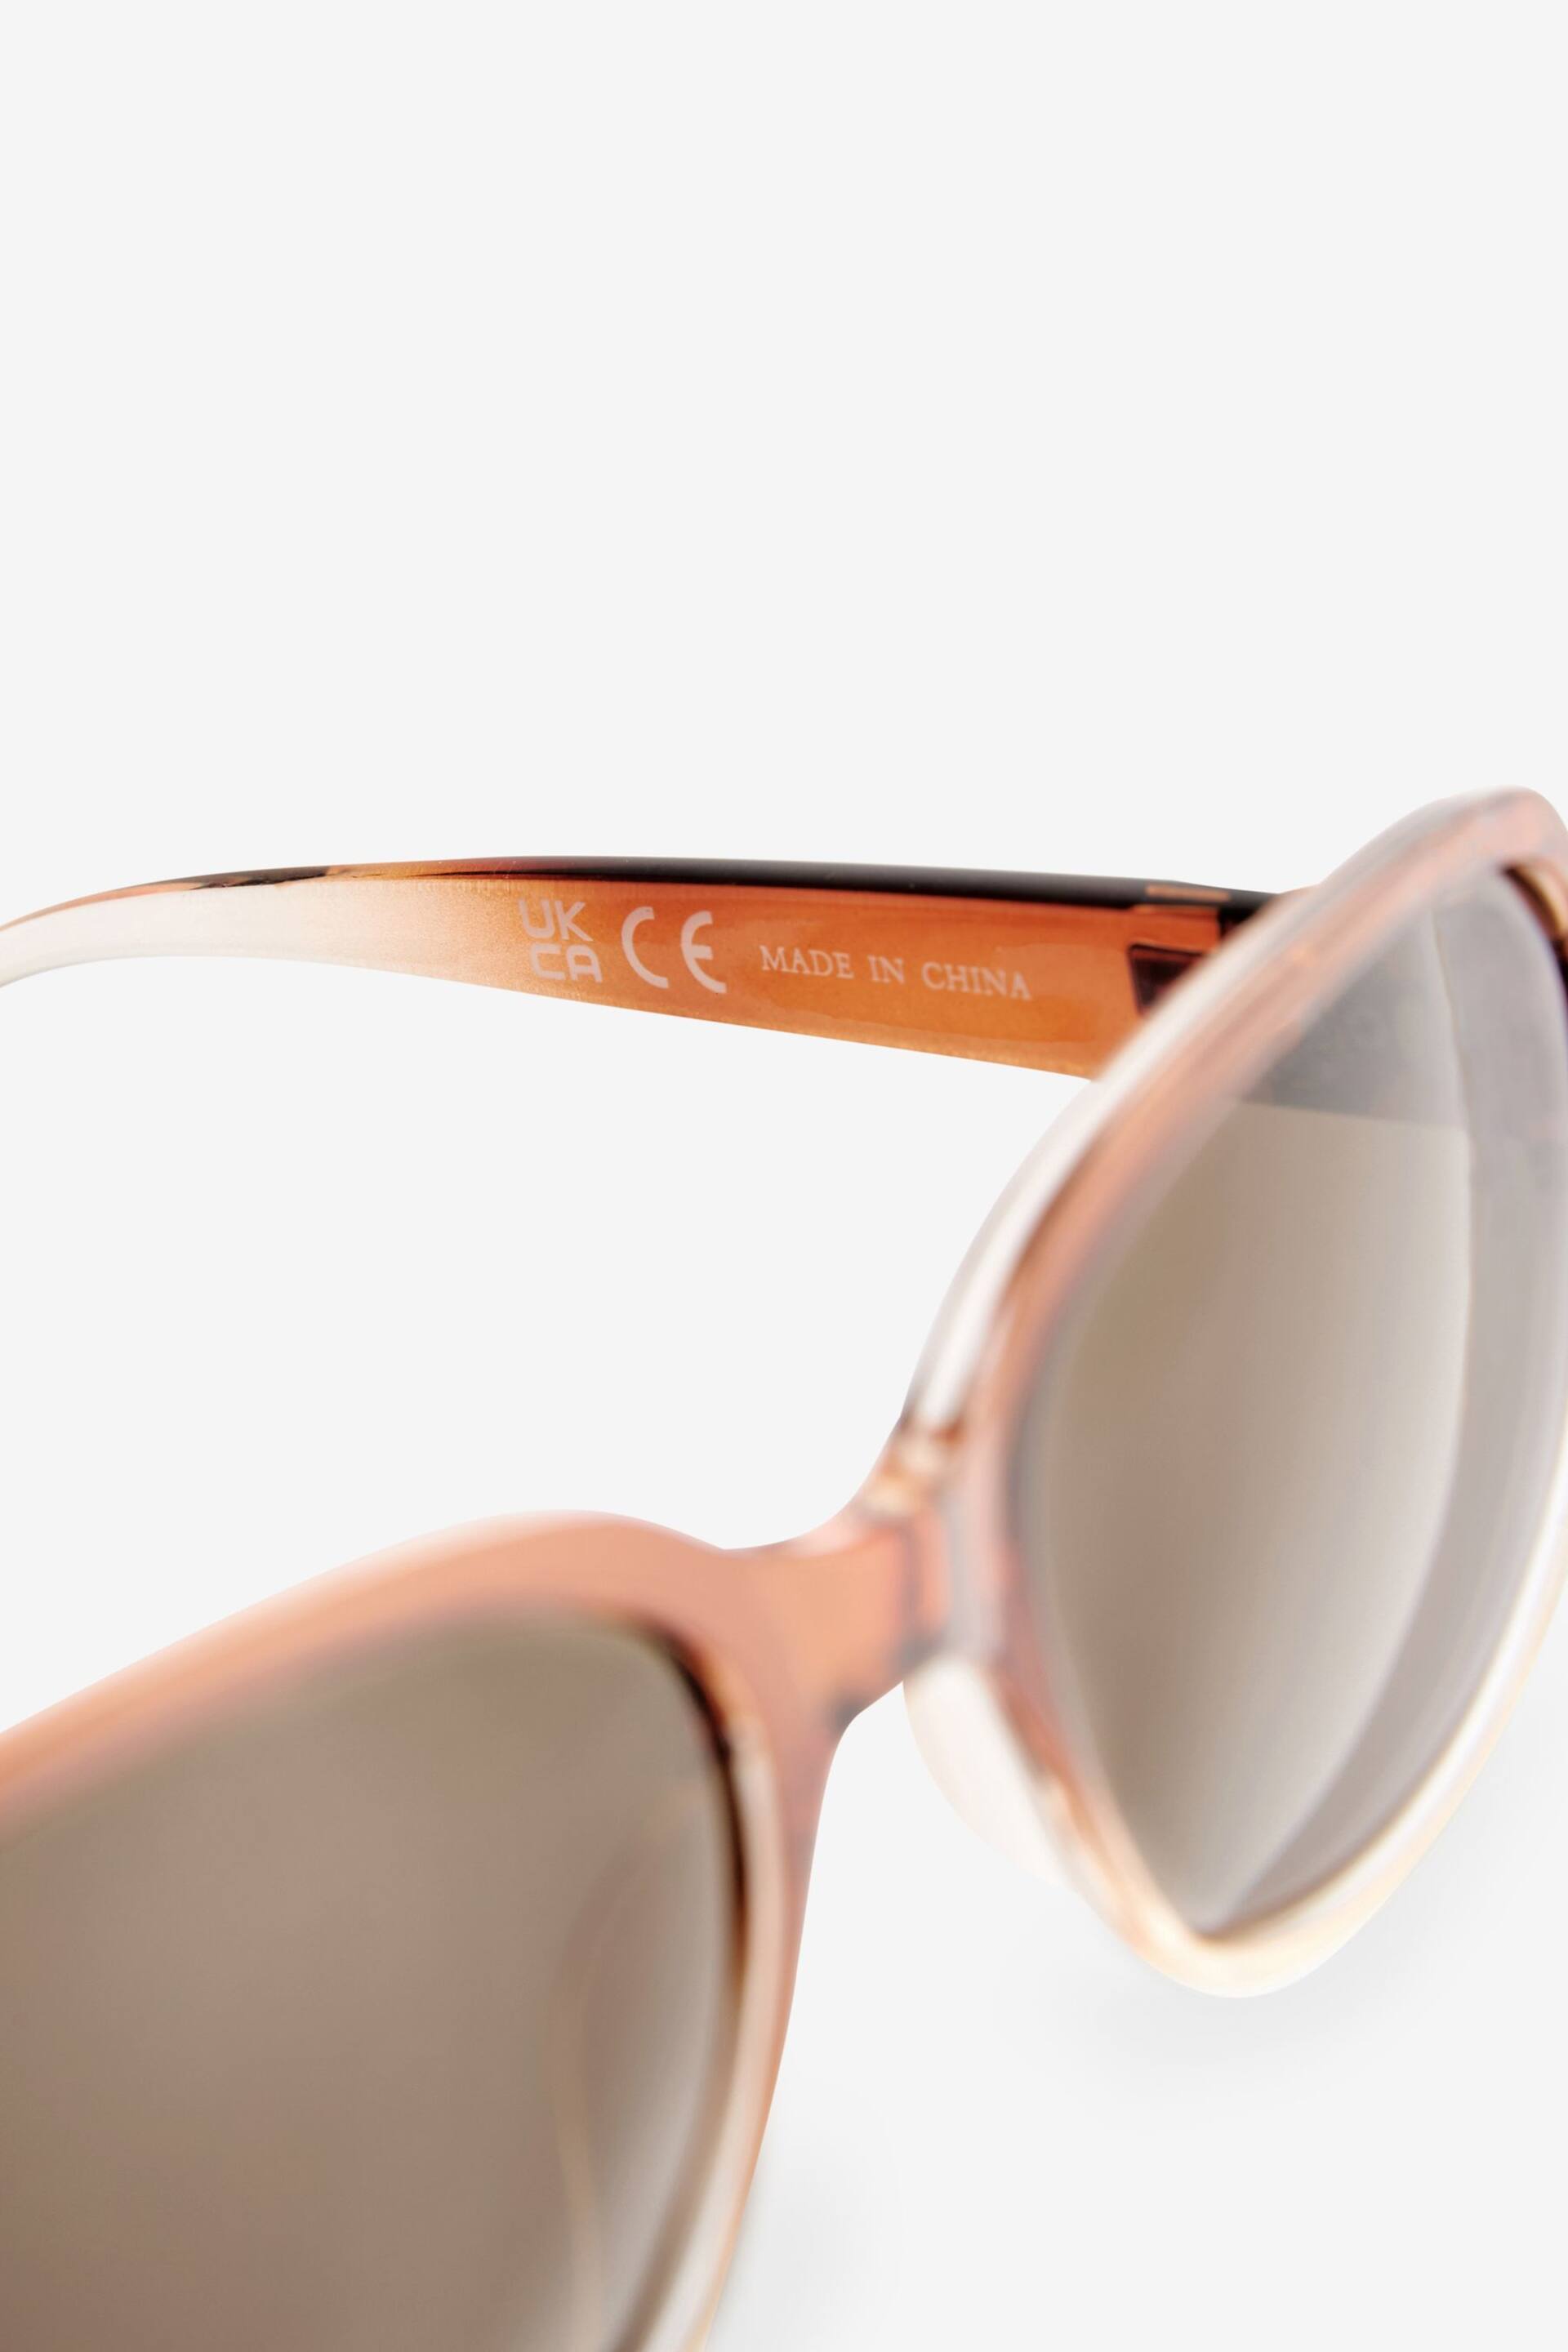 Toffee Brown Polarised Small Square Sunglasses - Image 5 of 5